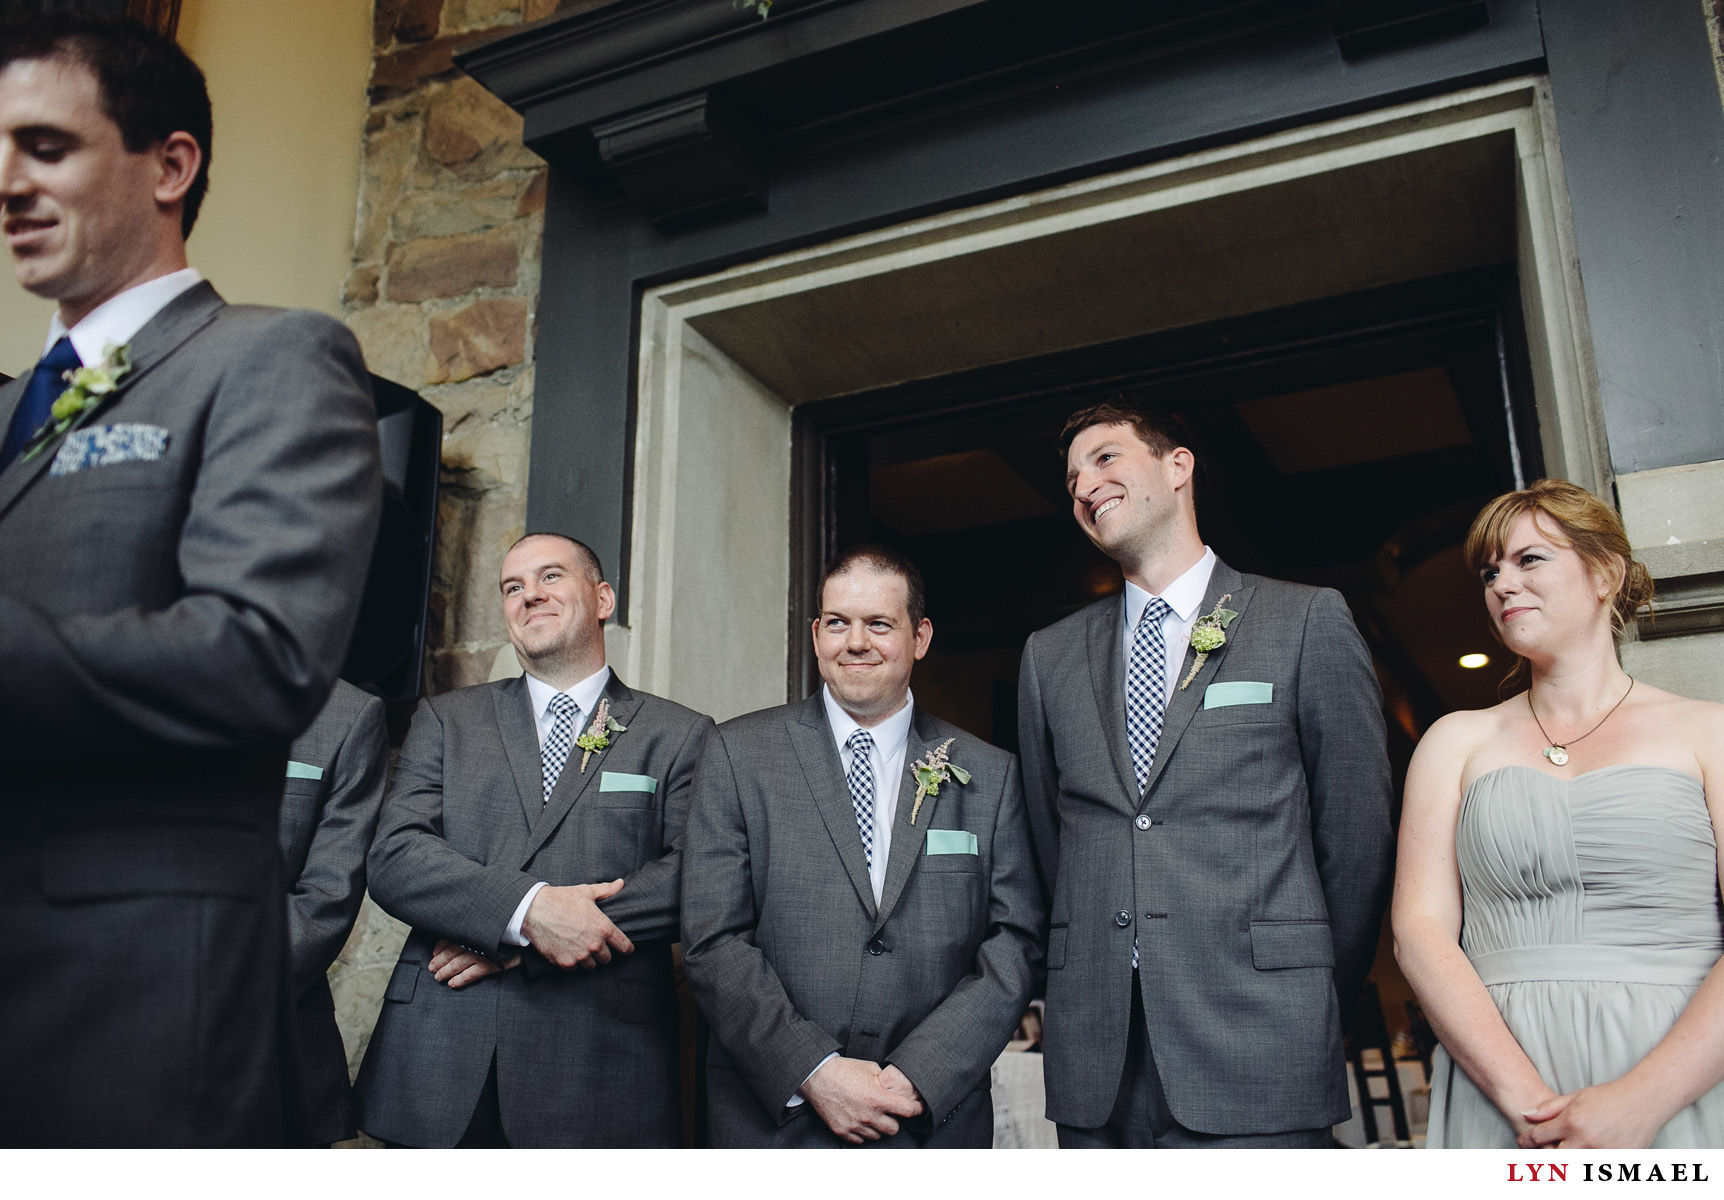 The groom's groomsmen smile happily as they watched the groom say his vows.